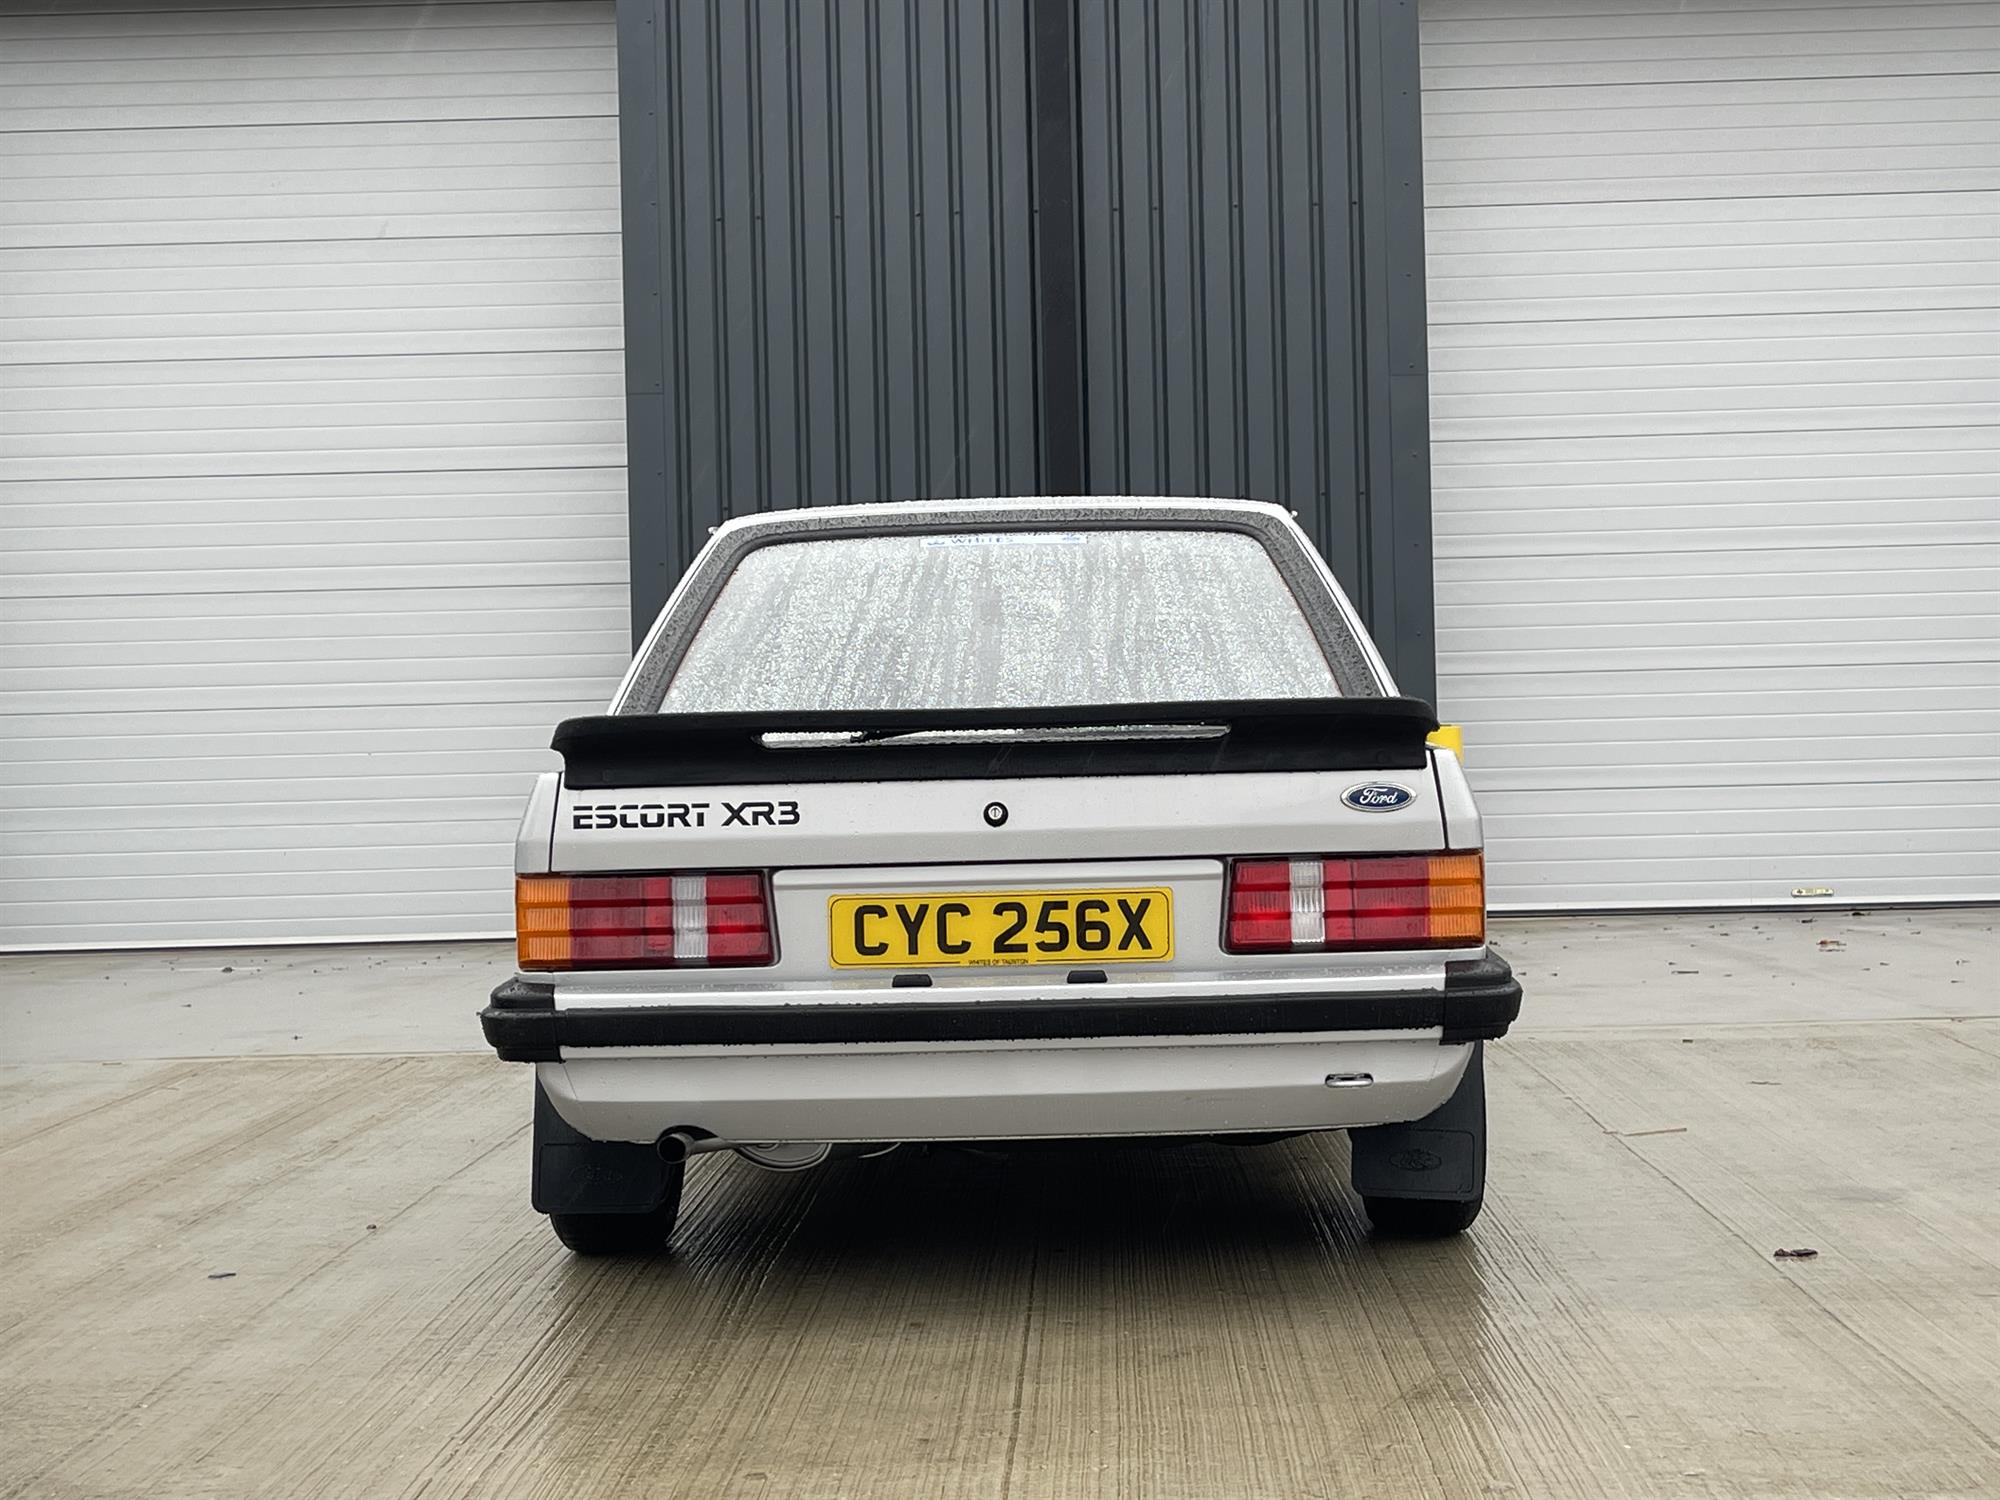 1982 Ford Escort XR3 - Image 7 of 10